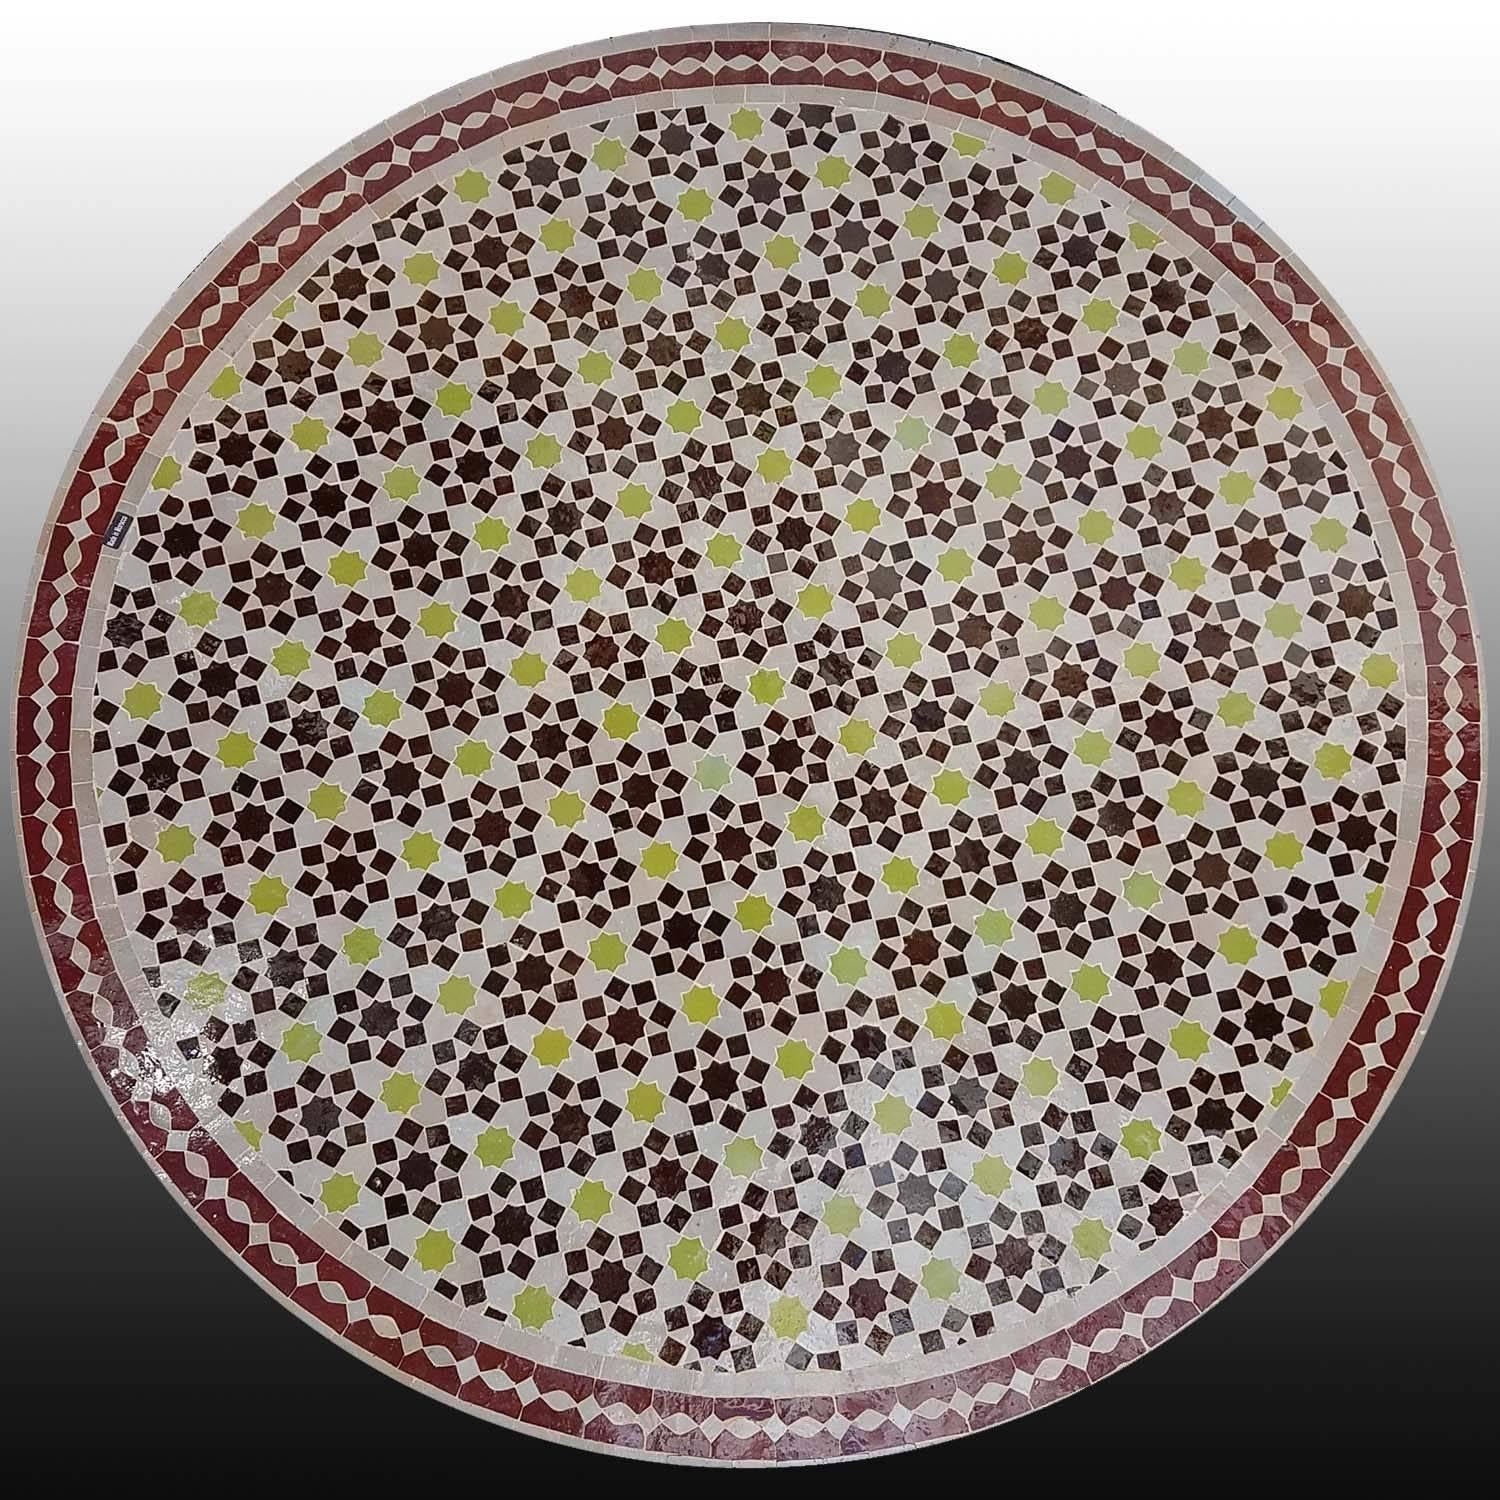 Contemporary Multicolor Mosaic Table, Wrought Iron Base Included